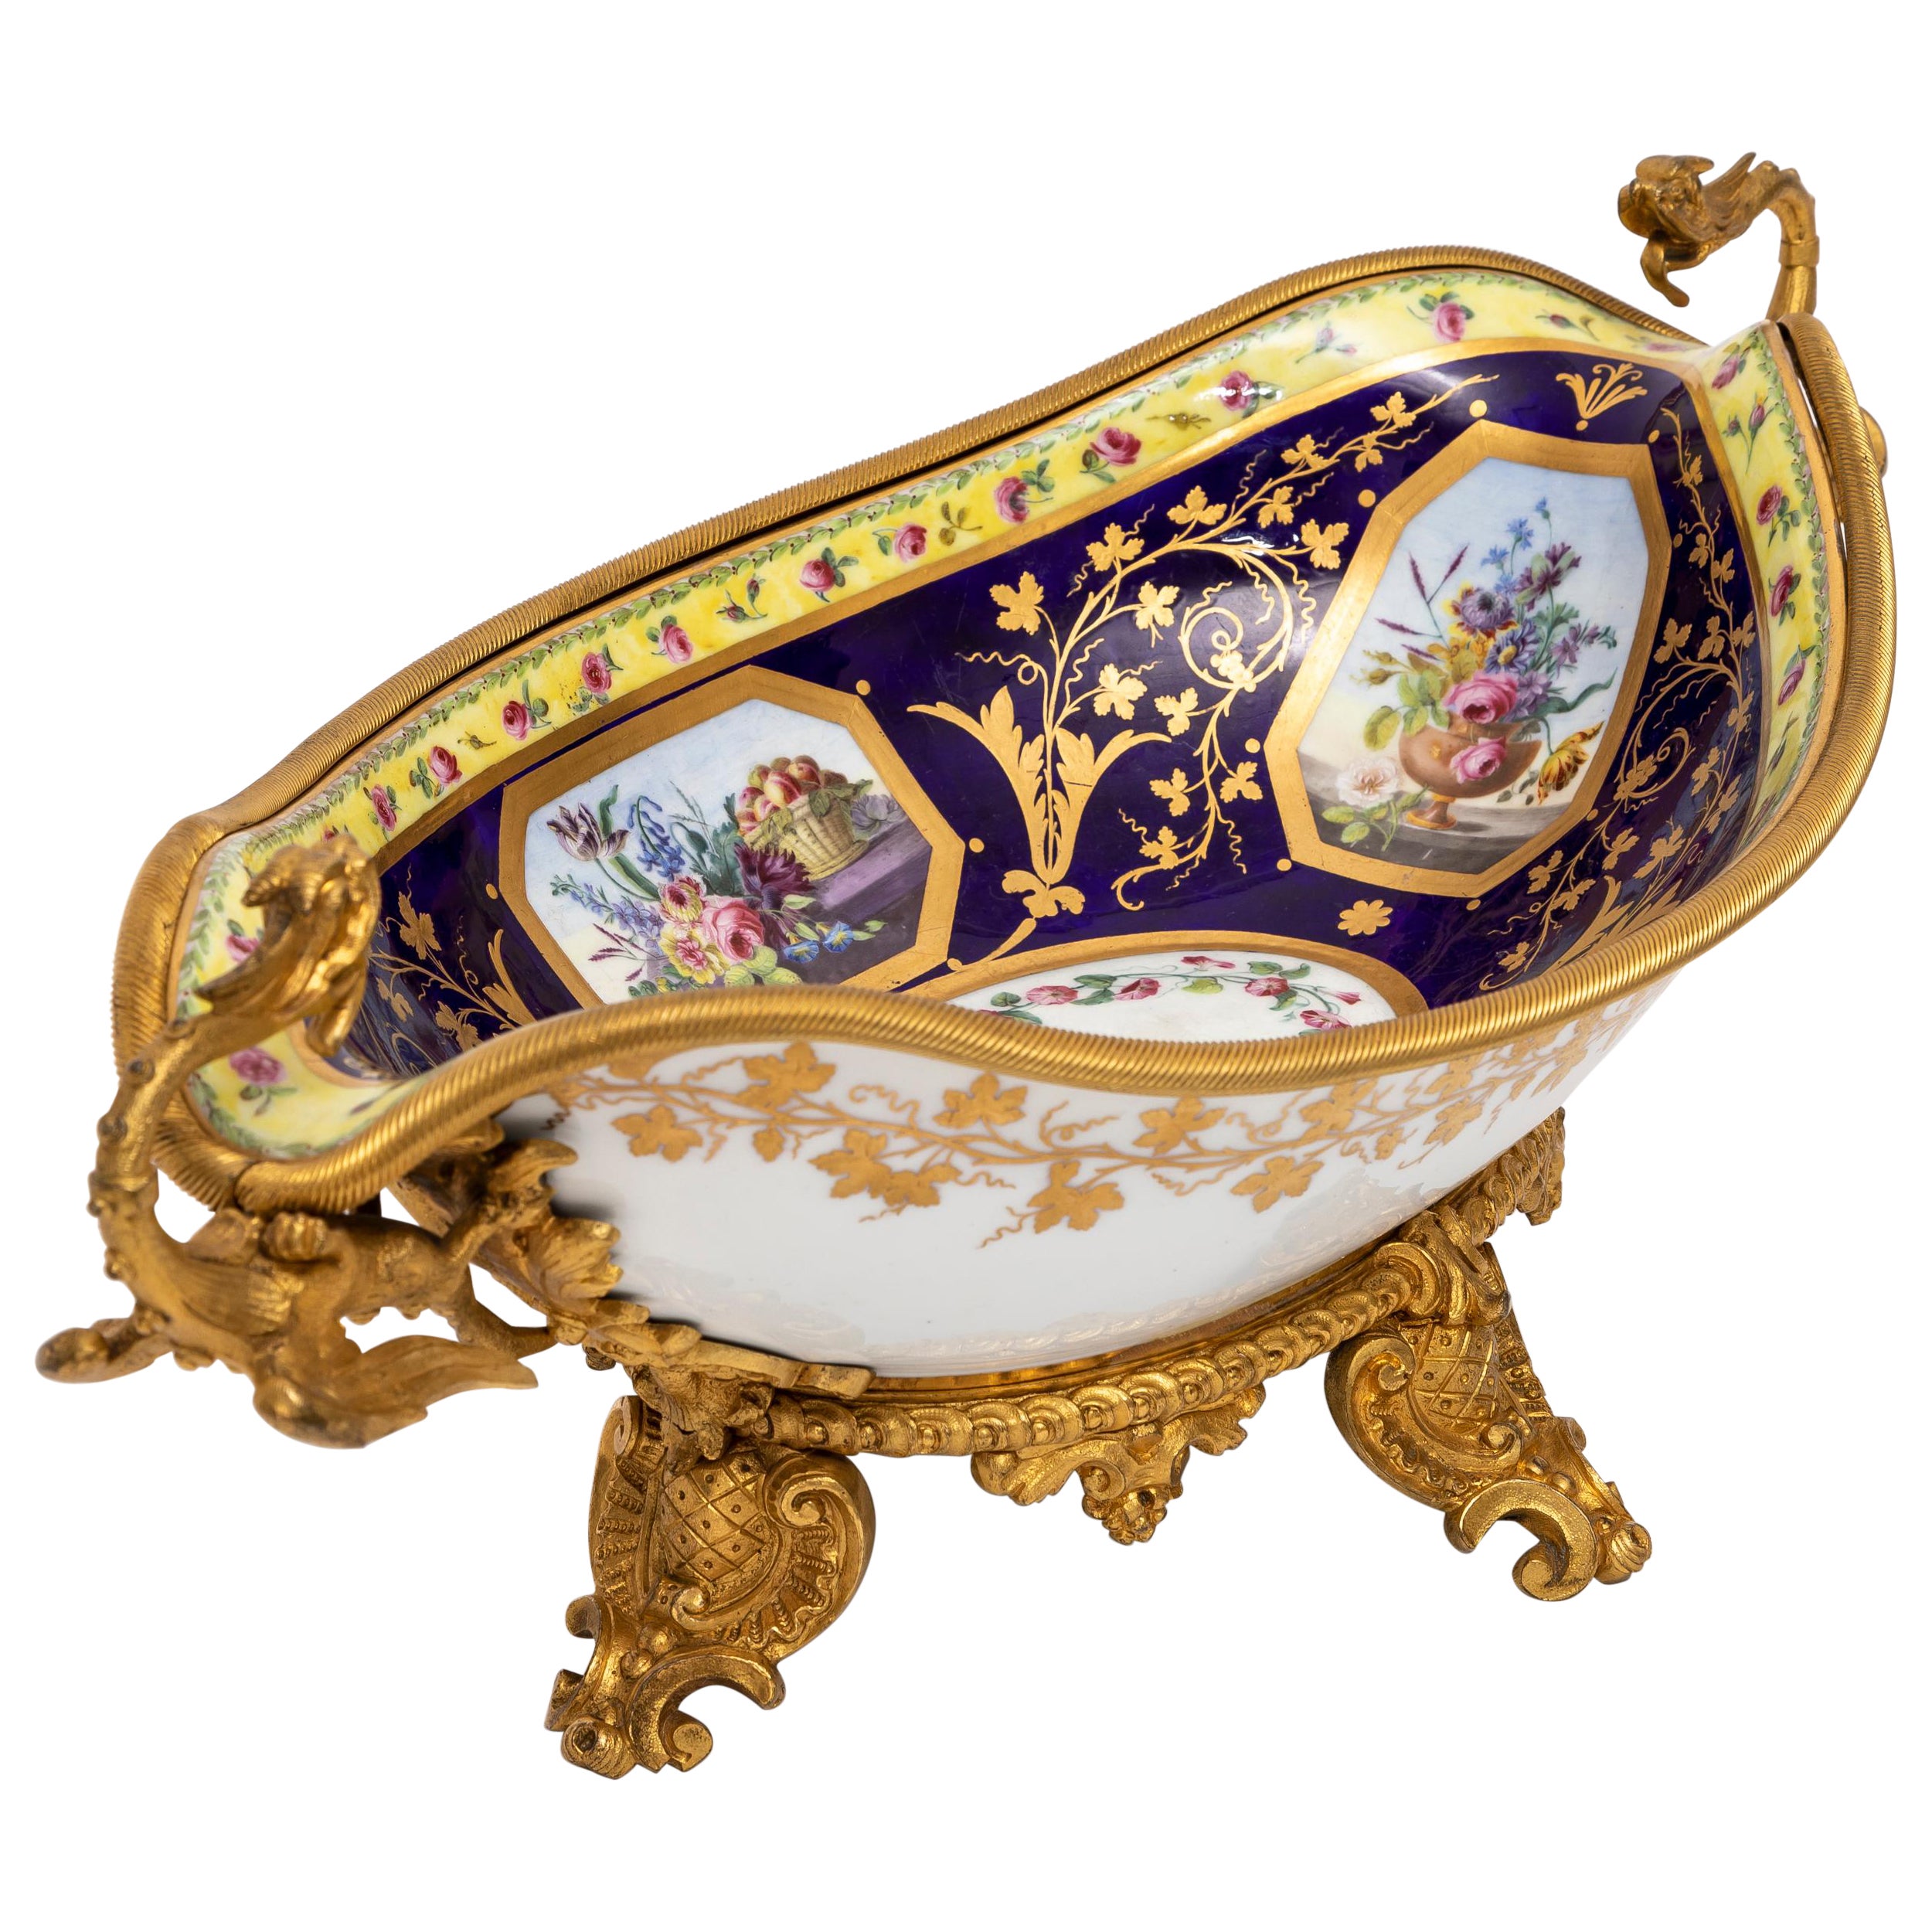 An 18th C. French Ormolu Mounted Sevres Porcelain Centerpiece w/ Dragon Handles For Sale